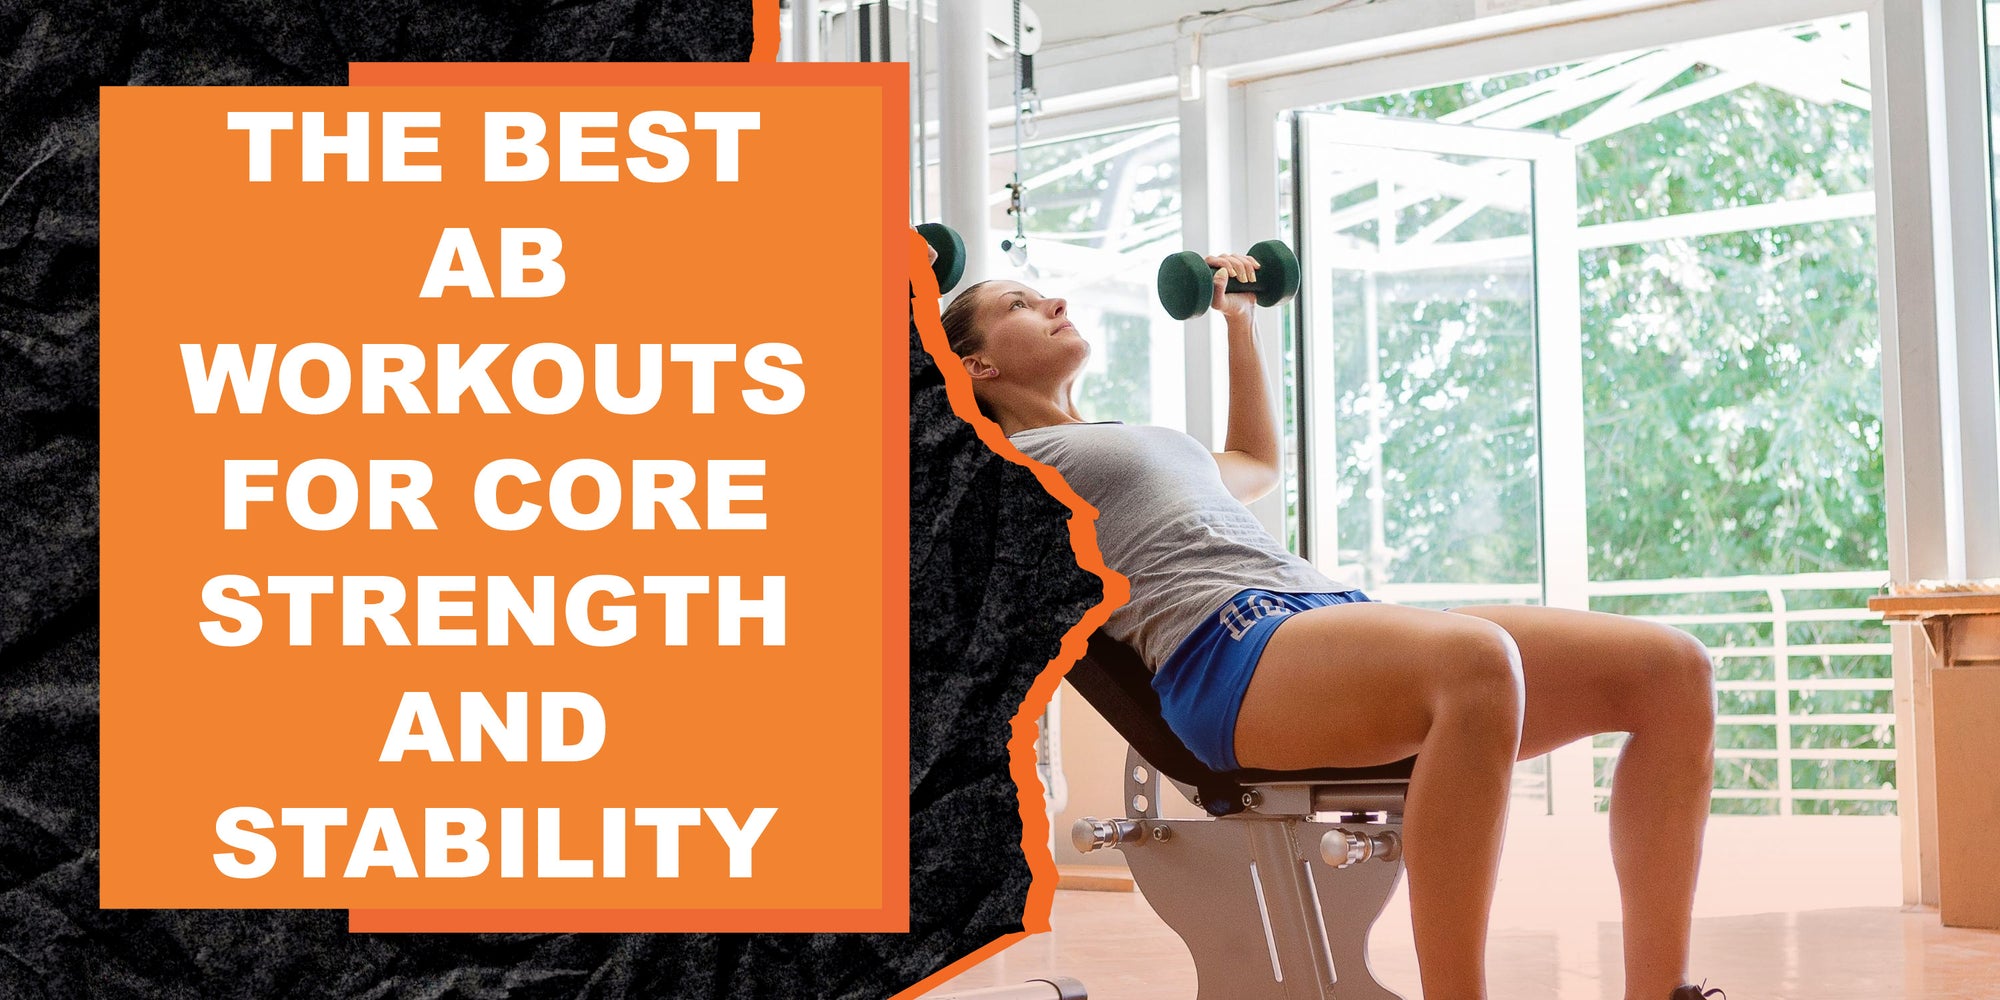 The Best Ab Workouts for Core Strength and Stability